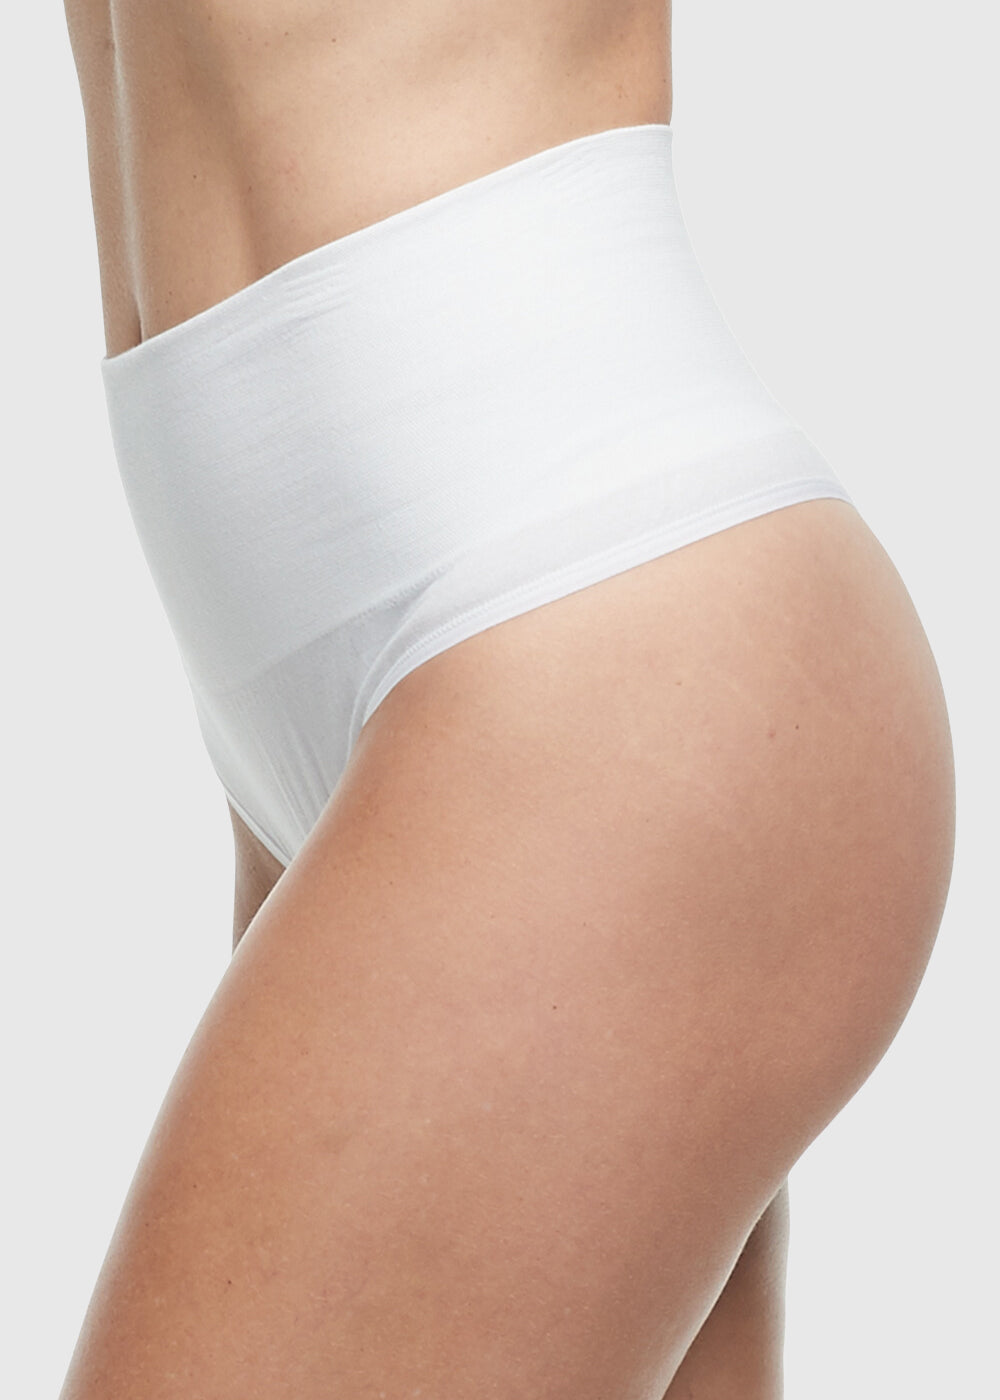 Alex Cotton Shaping Thong - Seamless from Yummie in White  - 1